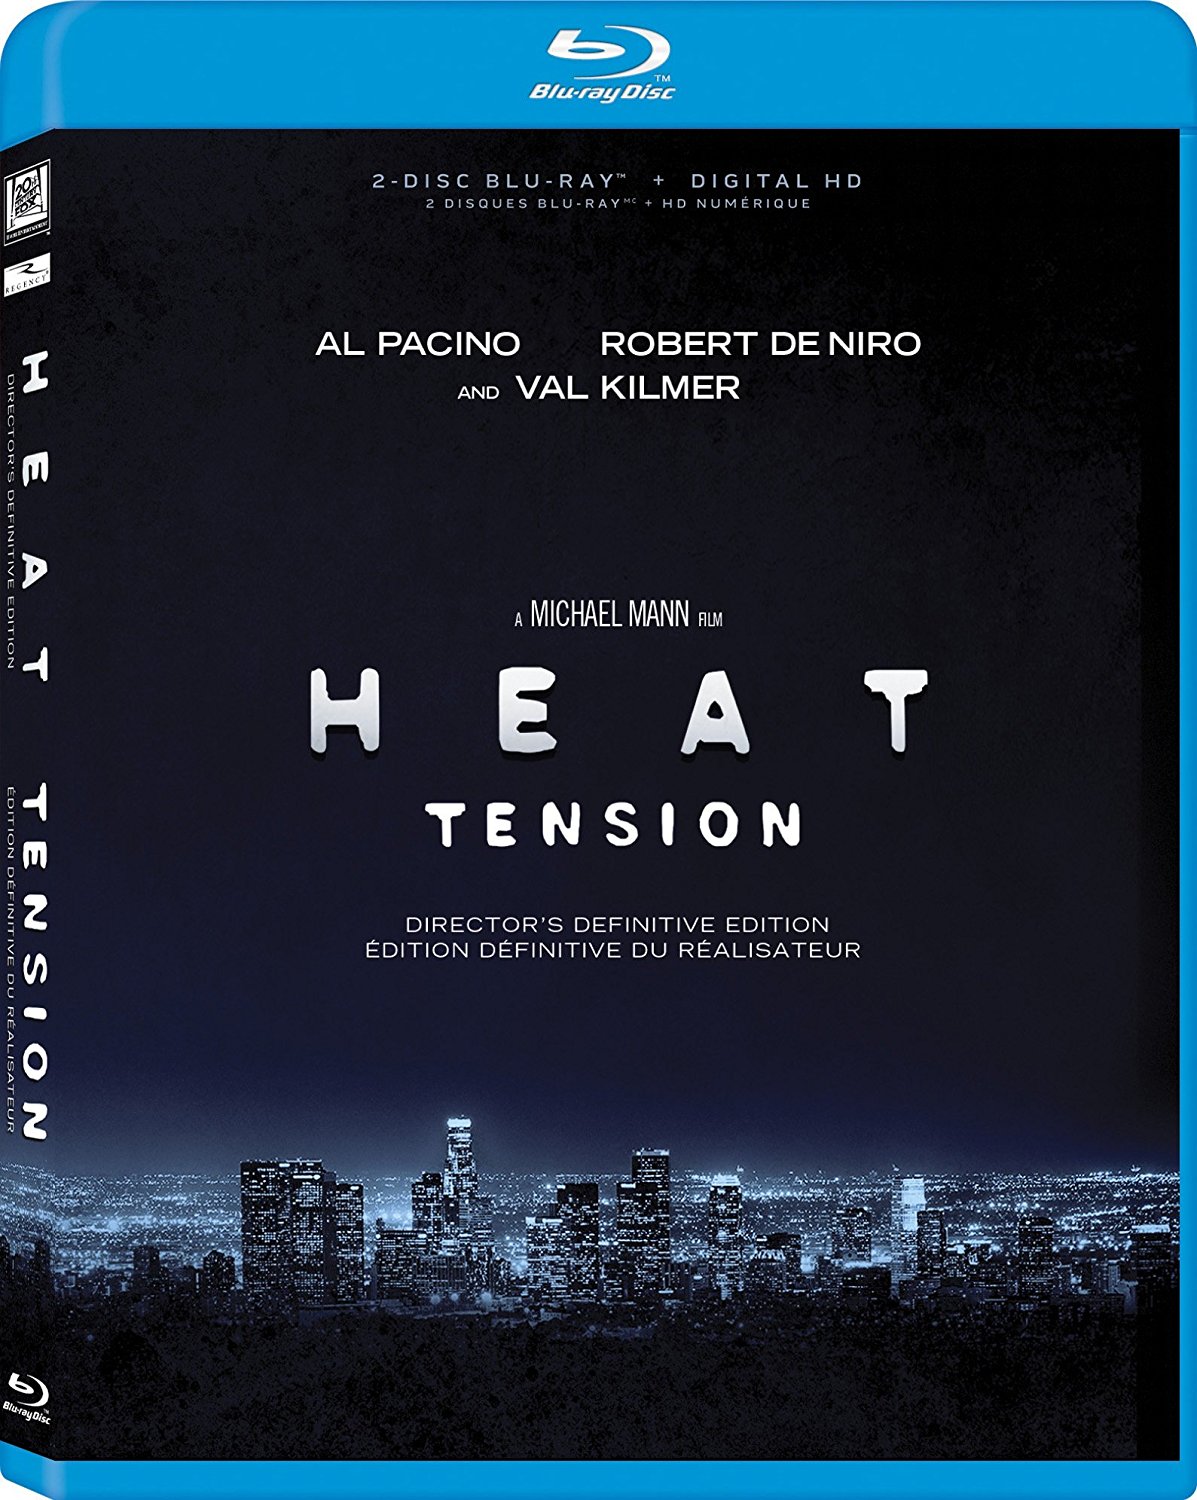 Michael Mann’s ‘Heat’ Gets Remastered in 4k for Director’s Definitive Cut ...